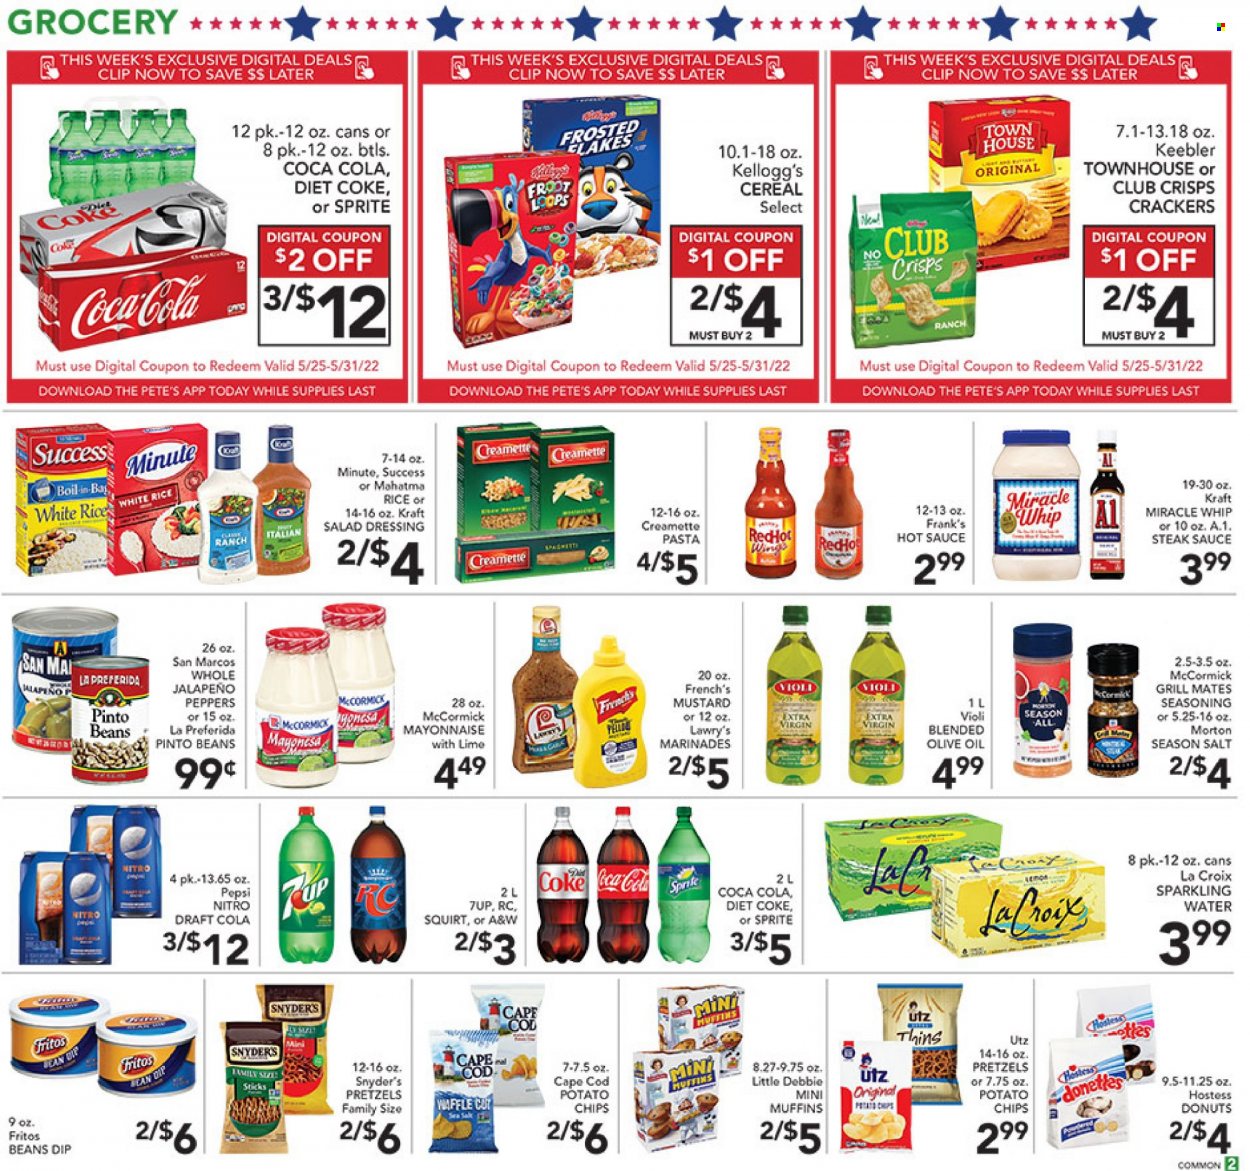 thumbnail - Pete's Fresh Market Flyer - 05/25/2022 - 05/31/2022 - Sales products - pretzels, donut, muffin, beans, jalapeño, cod, spaghetti, pasta, sauce, Kraft®, mayonnaise, Miracle Whip, dip, crackers, Kellogg's, Keebler, Fritos, potato chips, chips, Thins, salt, pinto beans, cereals, Frosted Flakes, white rice, Creamette, spice, mustard, salad dressing, steak sauce, hot sauce, dressing, extra virgin olive oil, olive oil, oil, Coca-Cola, Sprite, Pepsi, Diet Coke, 7UP, A&W, sparkling water, steak. Page 2.